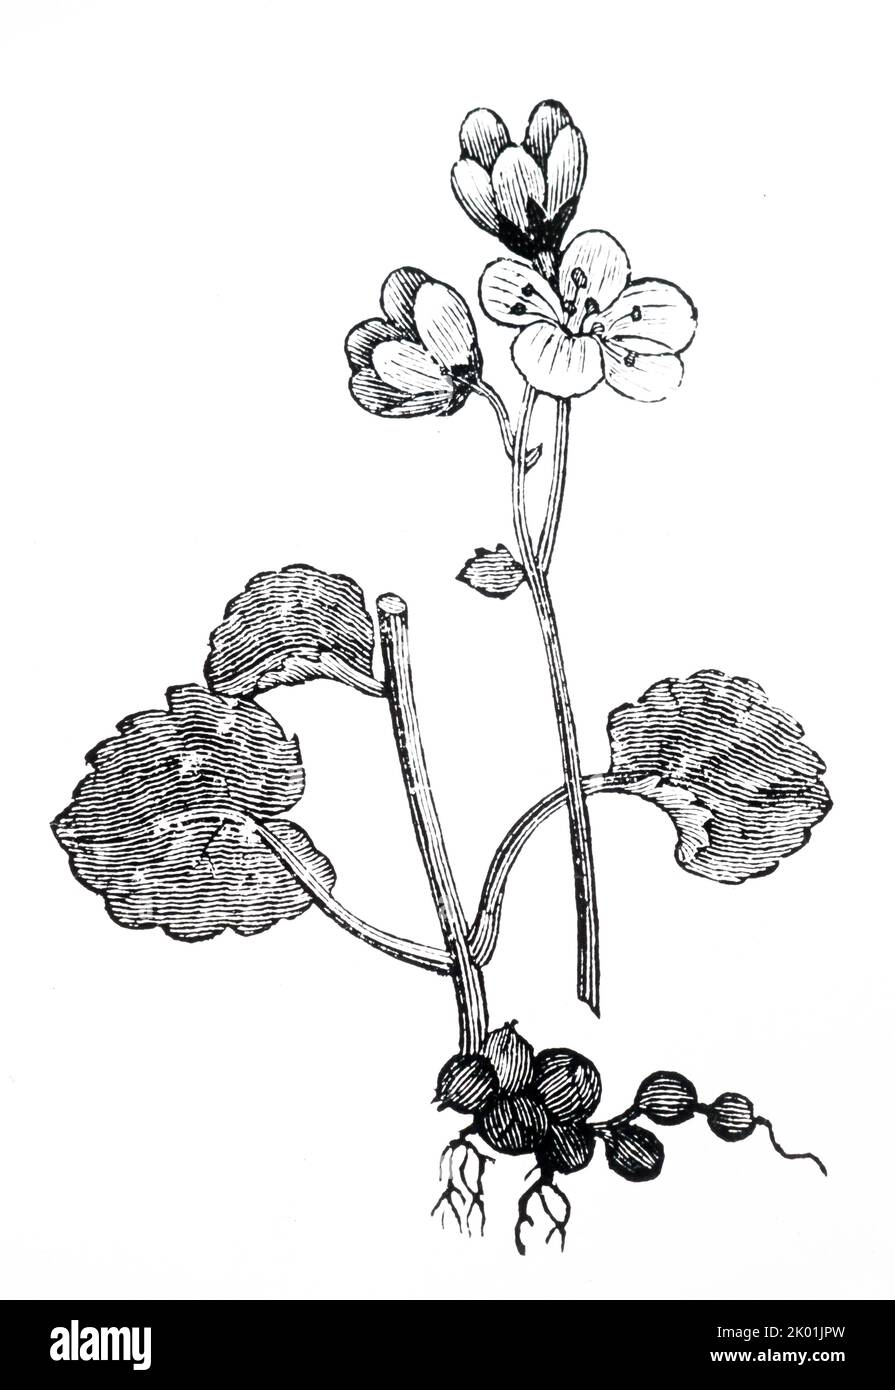 Saxifraga granulata. Used to treat kidney stones because of the appearance of the roots. Stock Photo